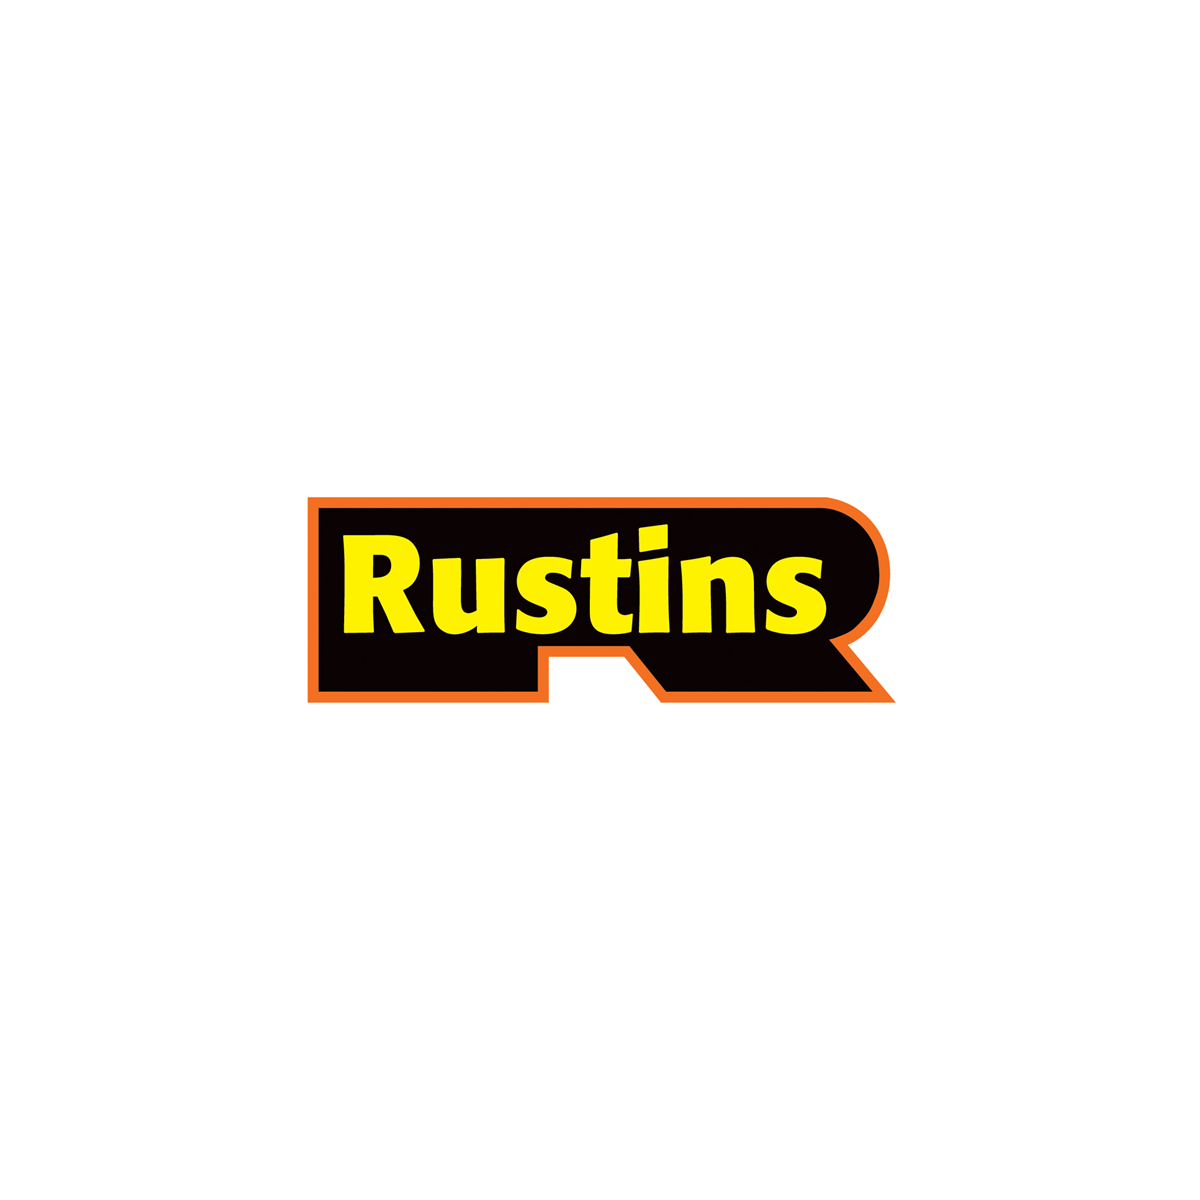 Where to buy Rustins Wood Dyes